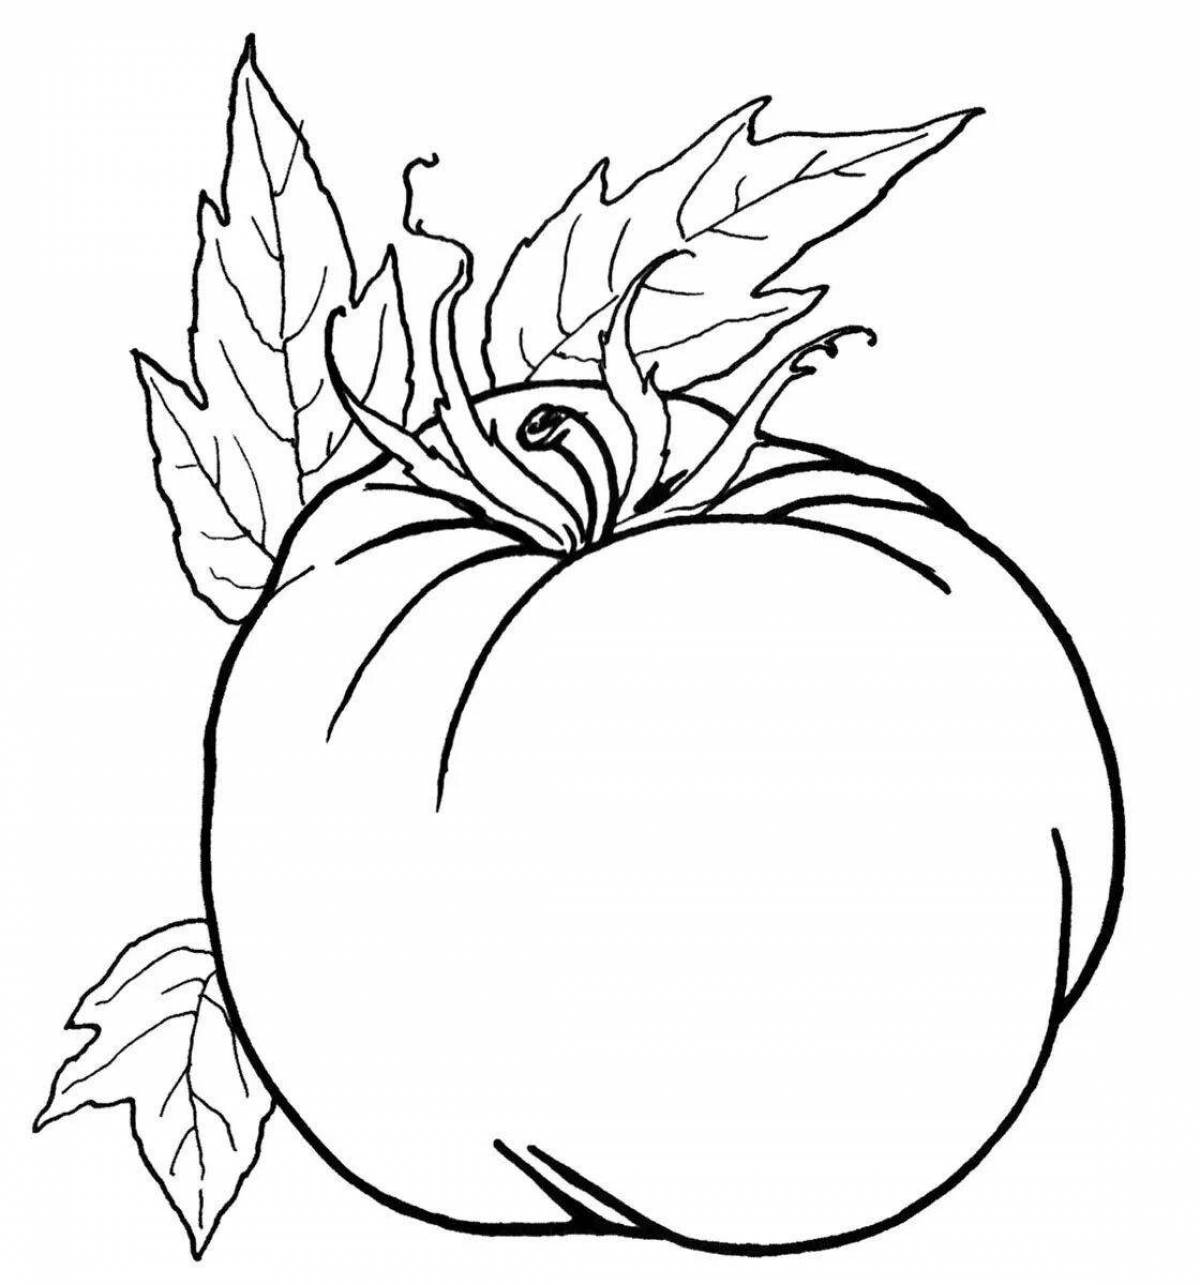 Playful tomato coloring page for 3-4 year olds